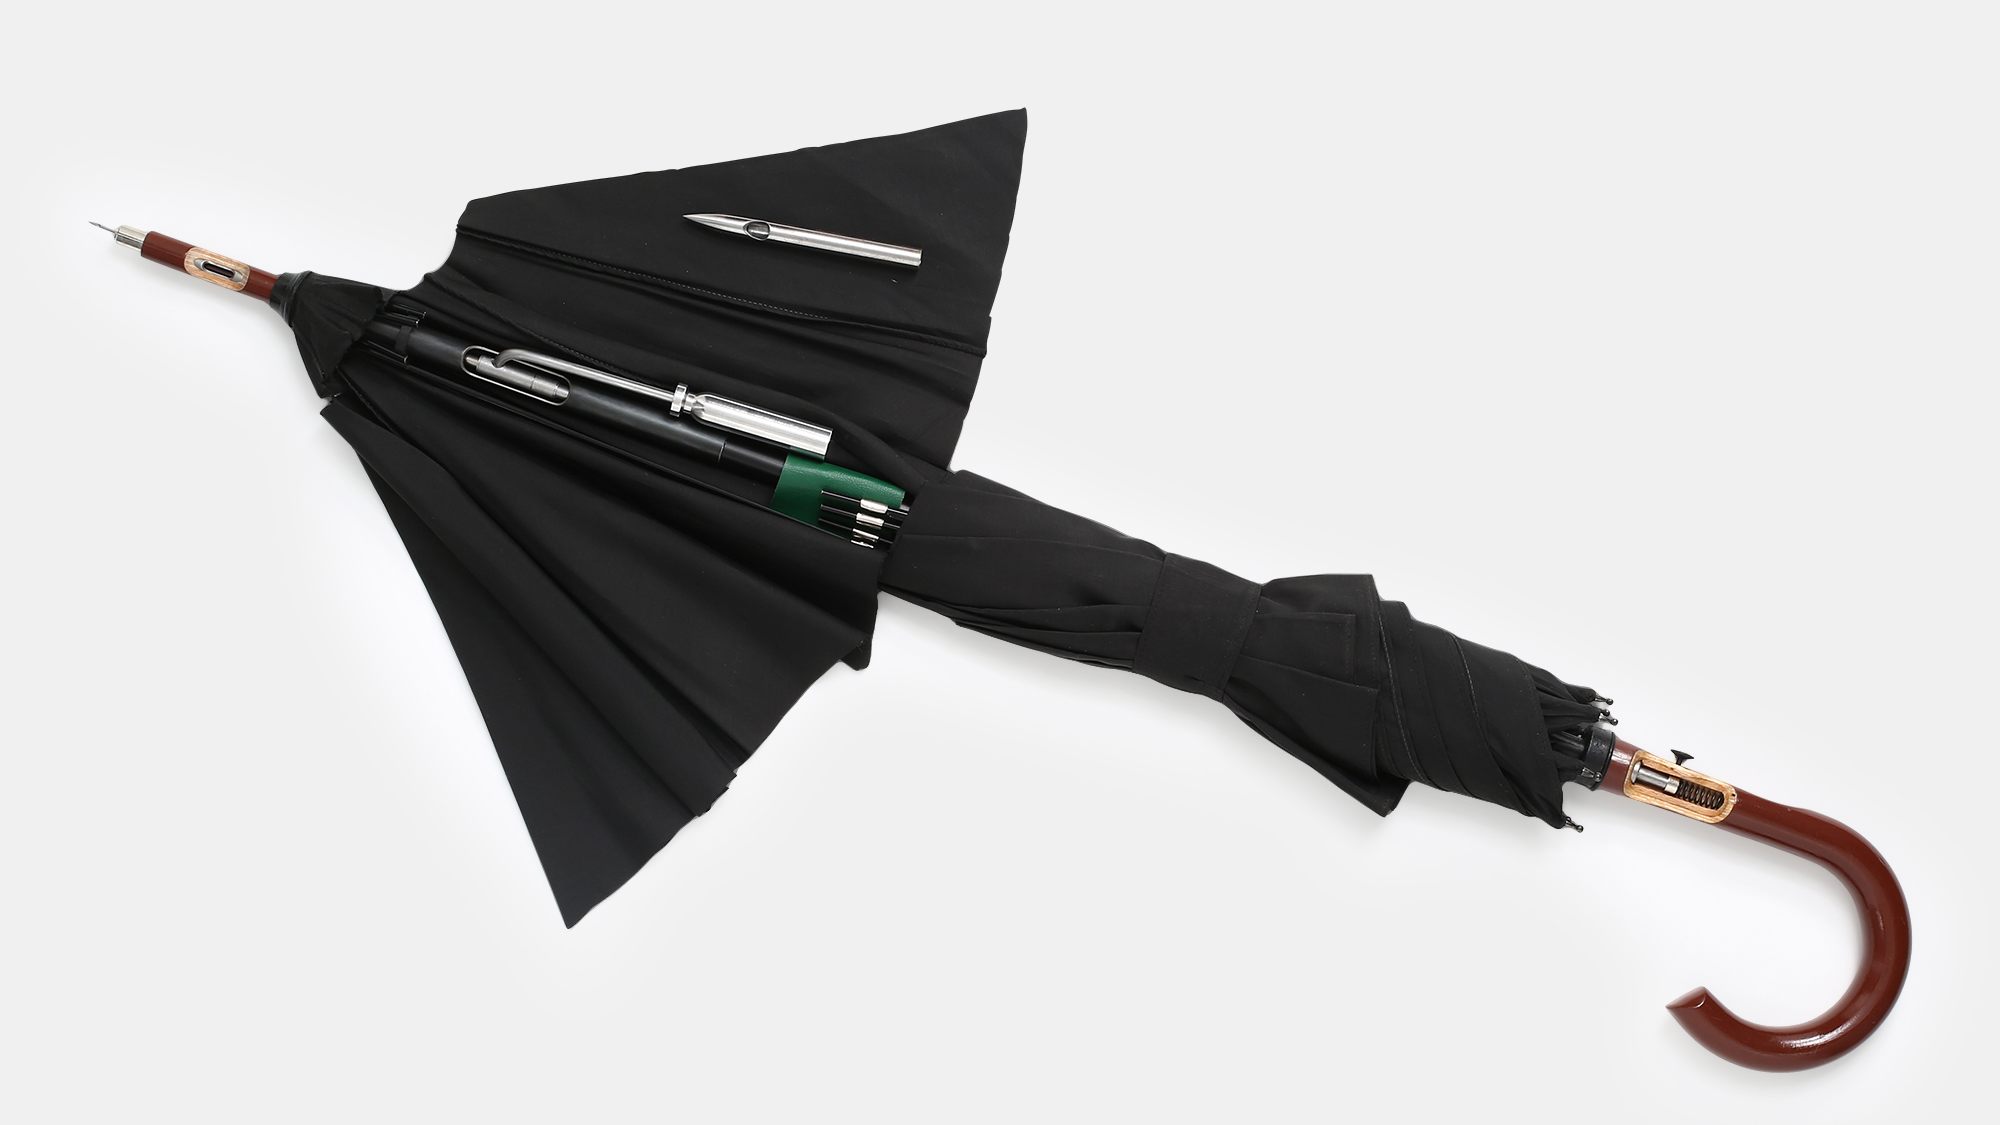 A replica of the "Bulgarian umbrella" – the weapon that killed Georgi Markov. Exhibited in the Deutsche Spionagemuseum in Berlin. - Hitman vs. Reality – is Agent 47 Better than Real Assassins? - dokument - 2019-08-02